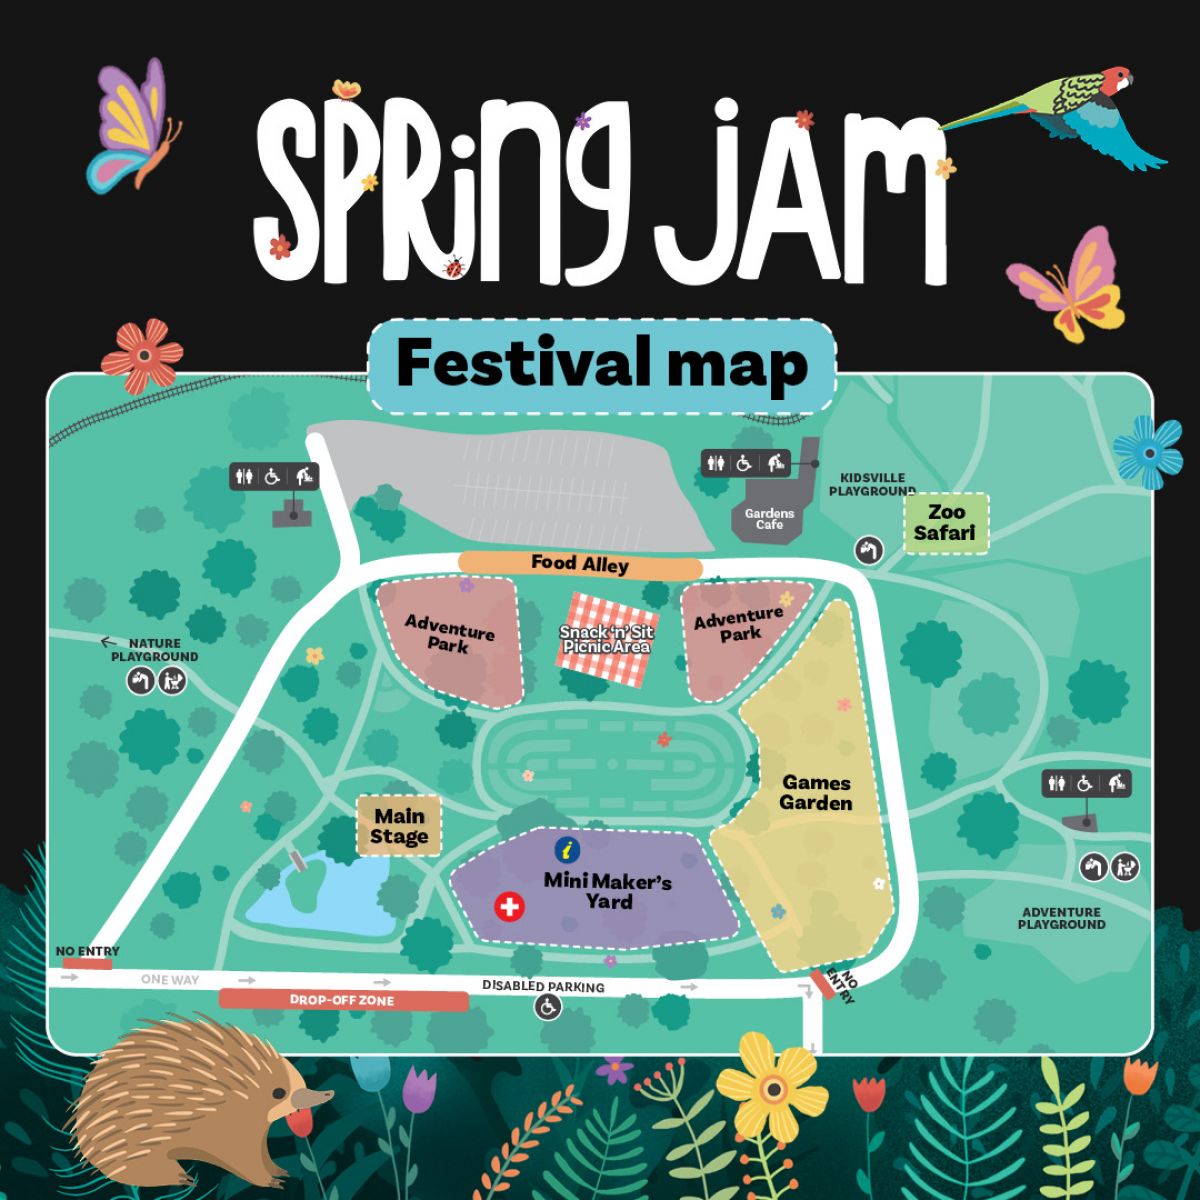 There will be zones set up all over the festival grounds with activities to delight and entertain youngsters. Head online to see the full festival program, map and more! 